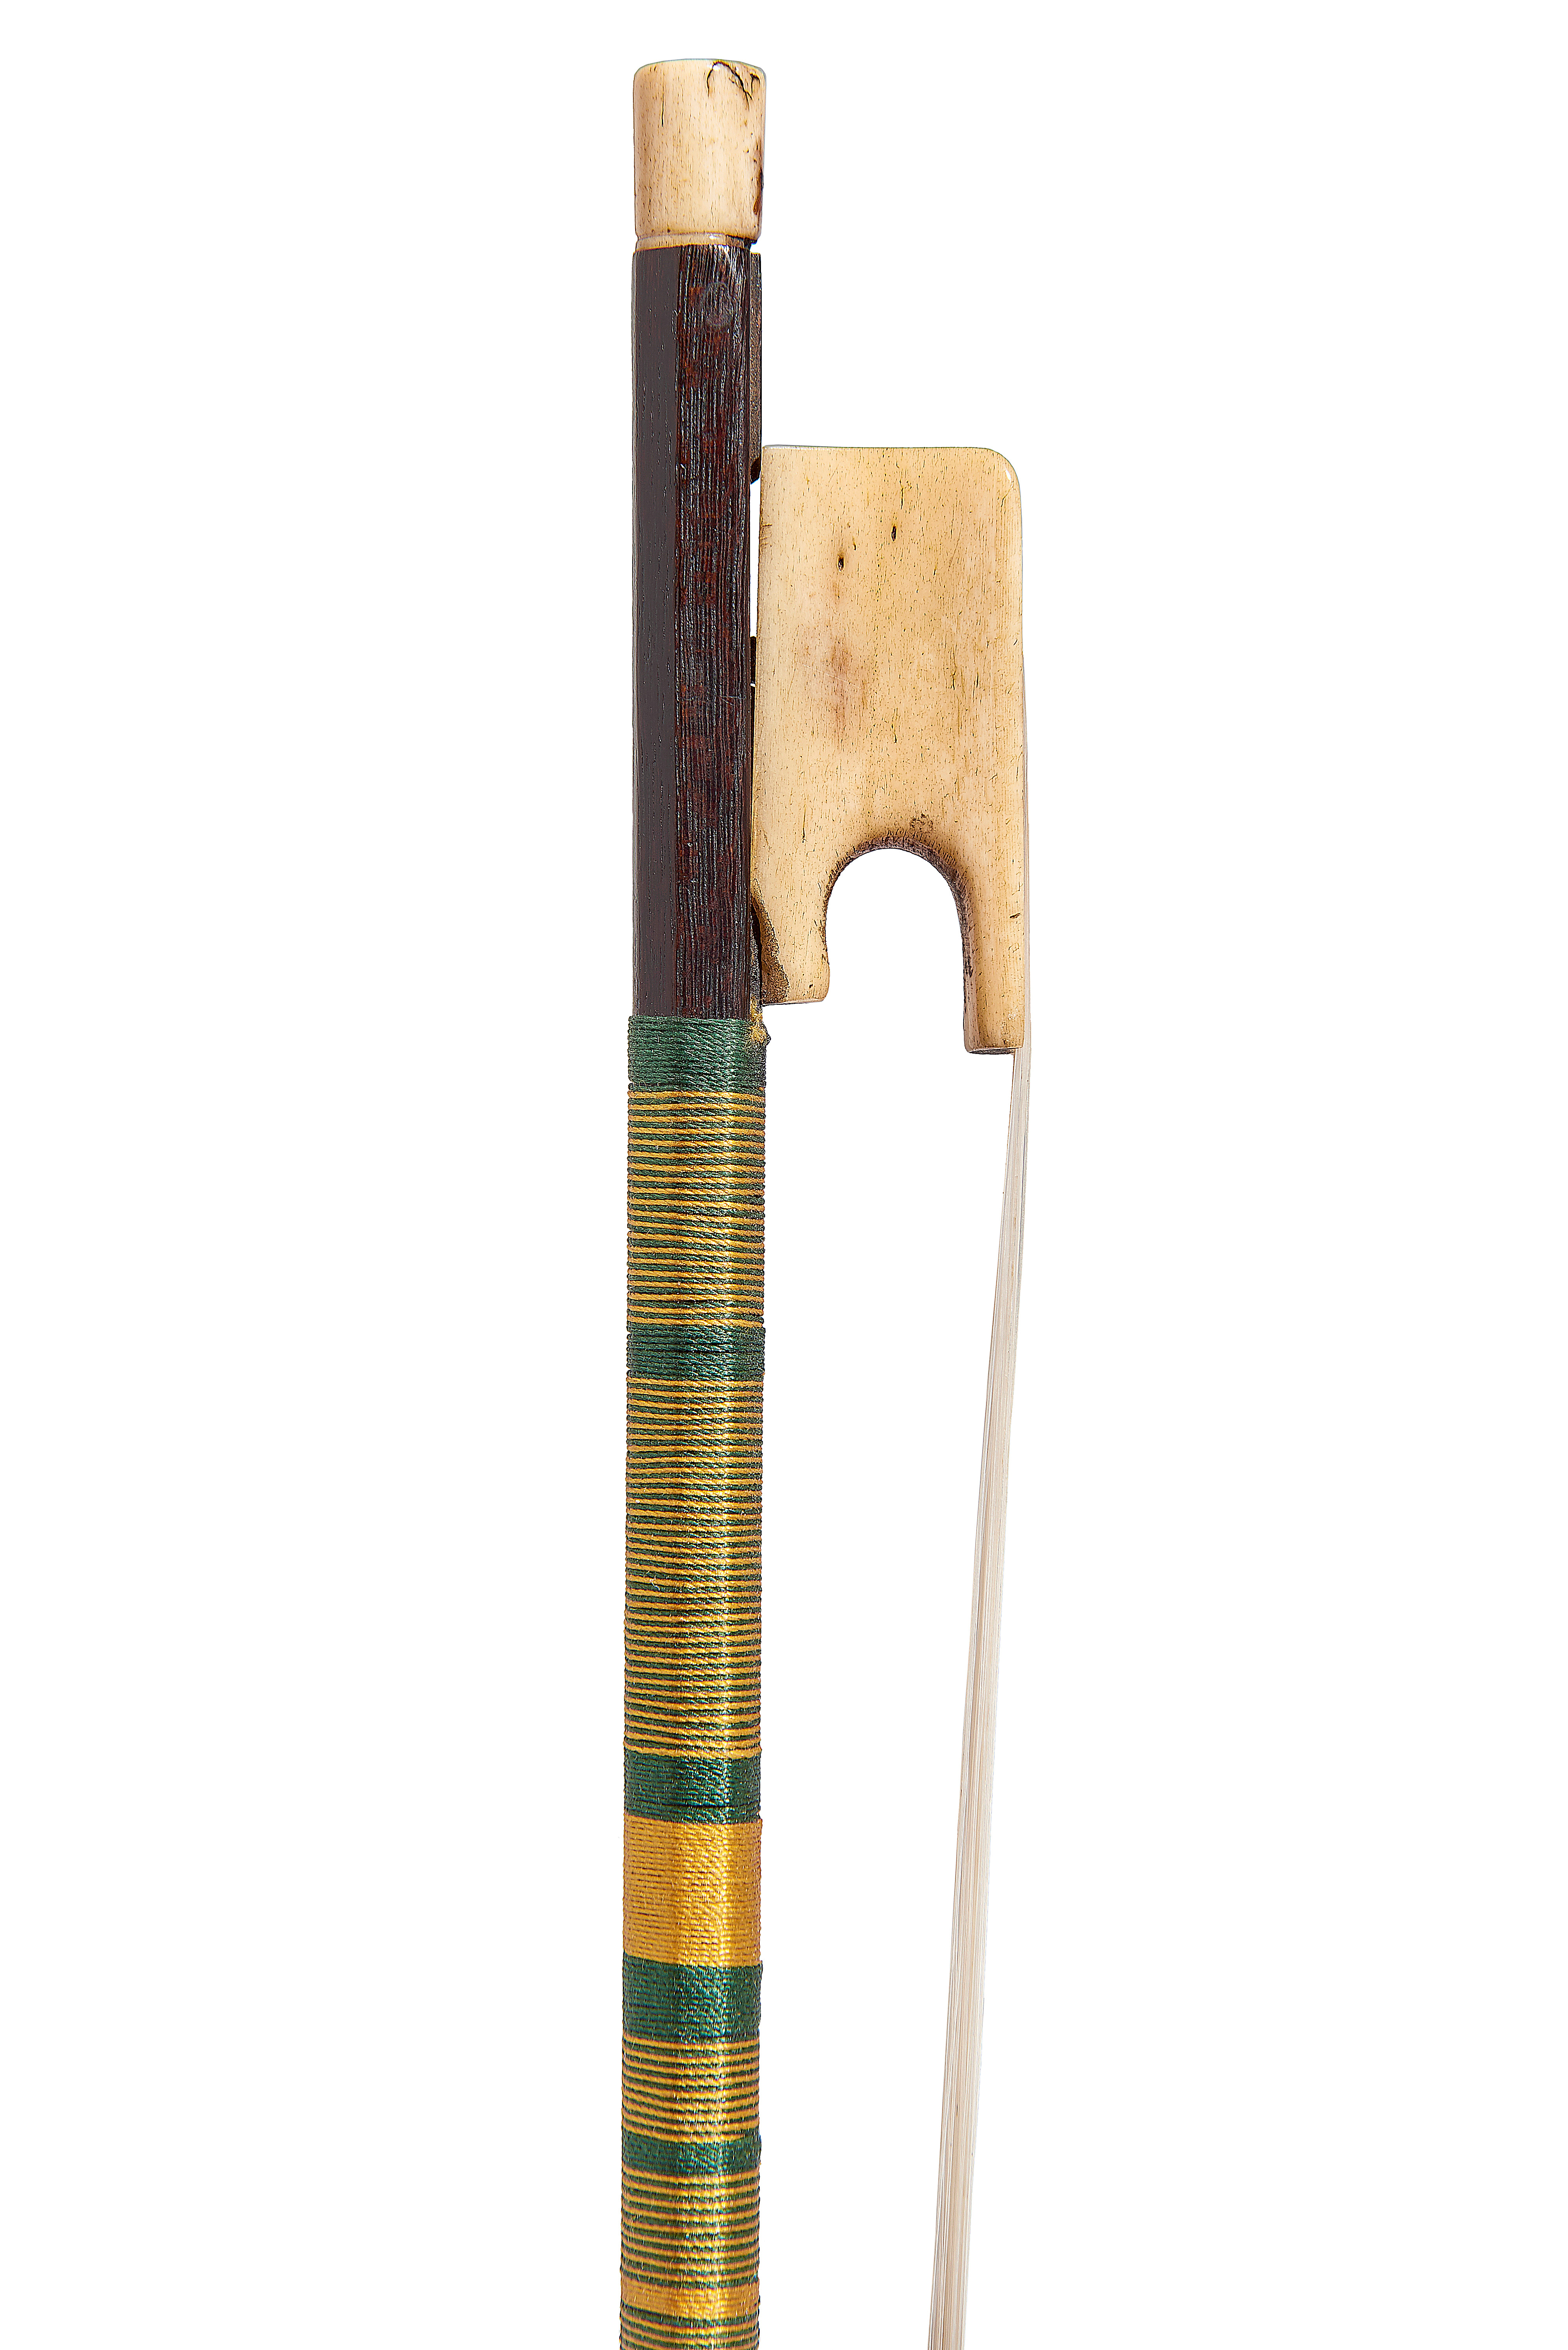 Lot 188 - An Ivory-Mounted Violin Bow, probably French, circa 1820 ...